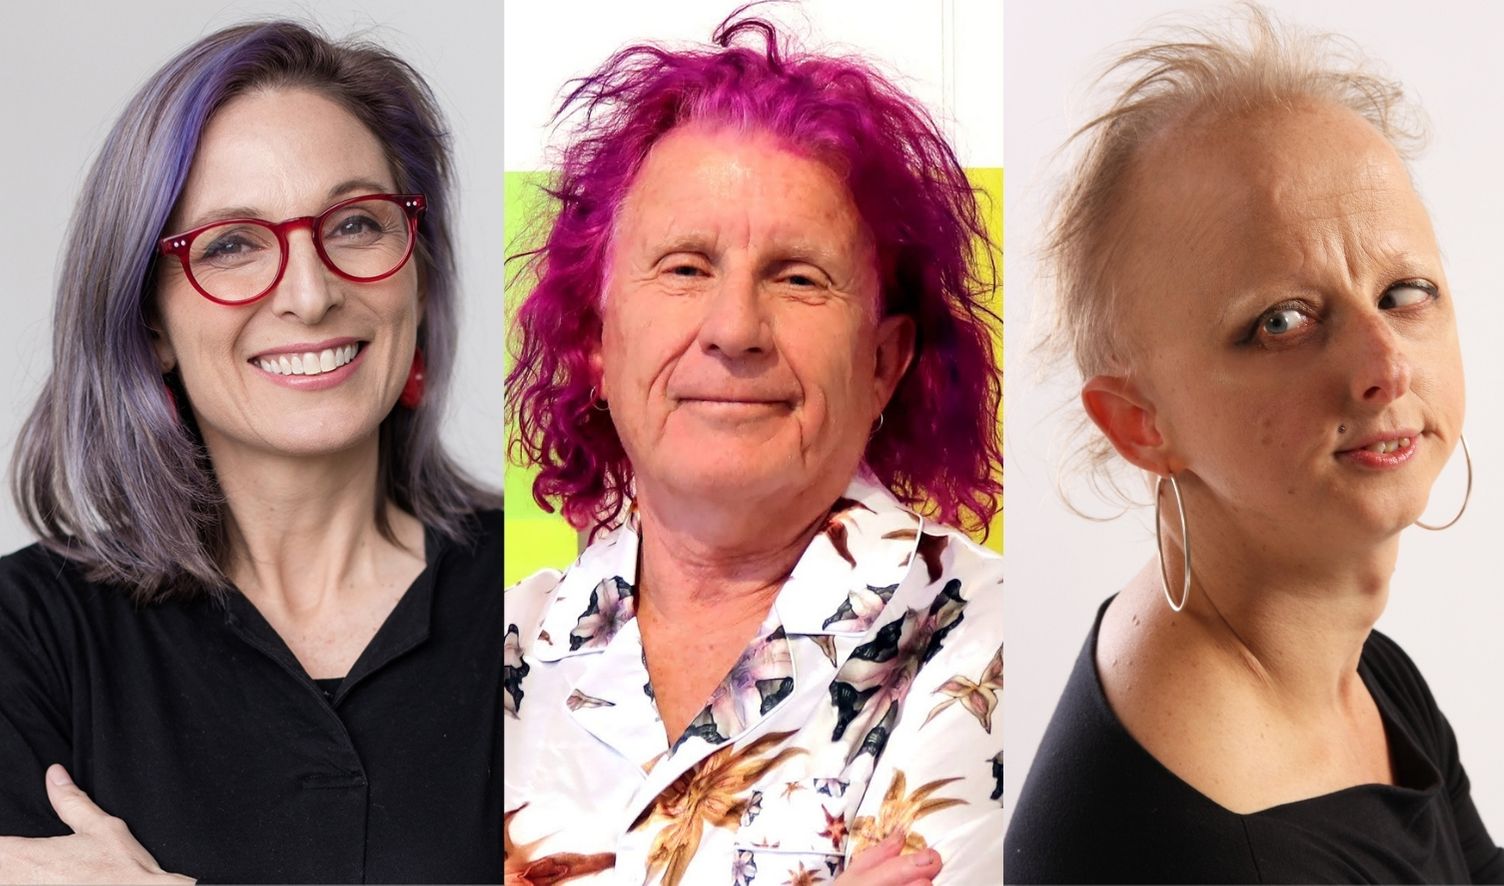 Headshots of three people. On the left is a woman with long dark hair with purple highlights wearing a black top and red-framed glasses. In the middle is a man with pink hair wearing a floral patterned shirt. On the right is a woman with short blonde hair wearing a black top and large hoop earrings.  